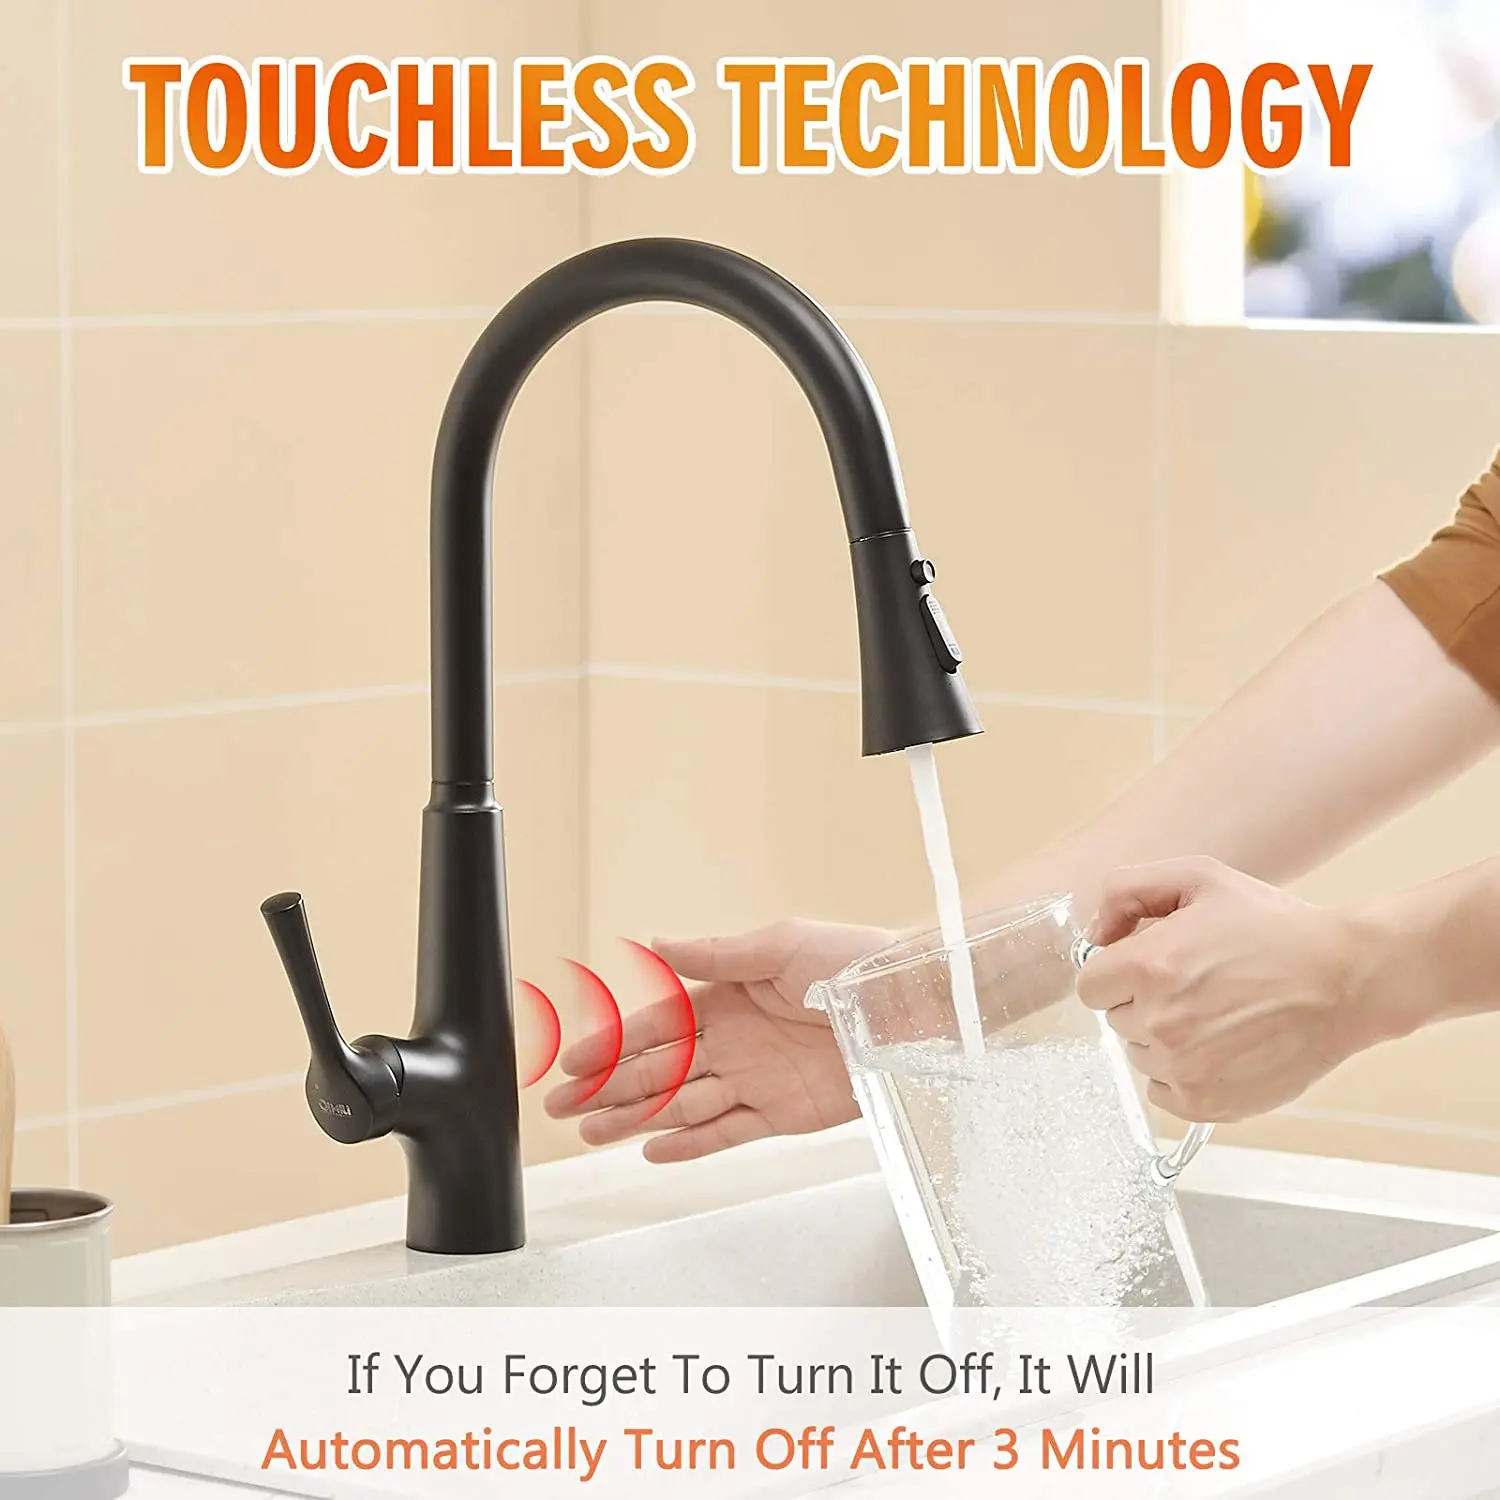 High quality black commercial pull down sprayer touch sensor mixer tap kitchen faucet for sink